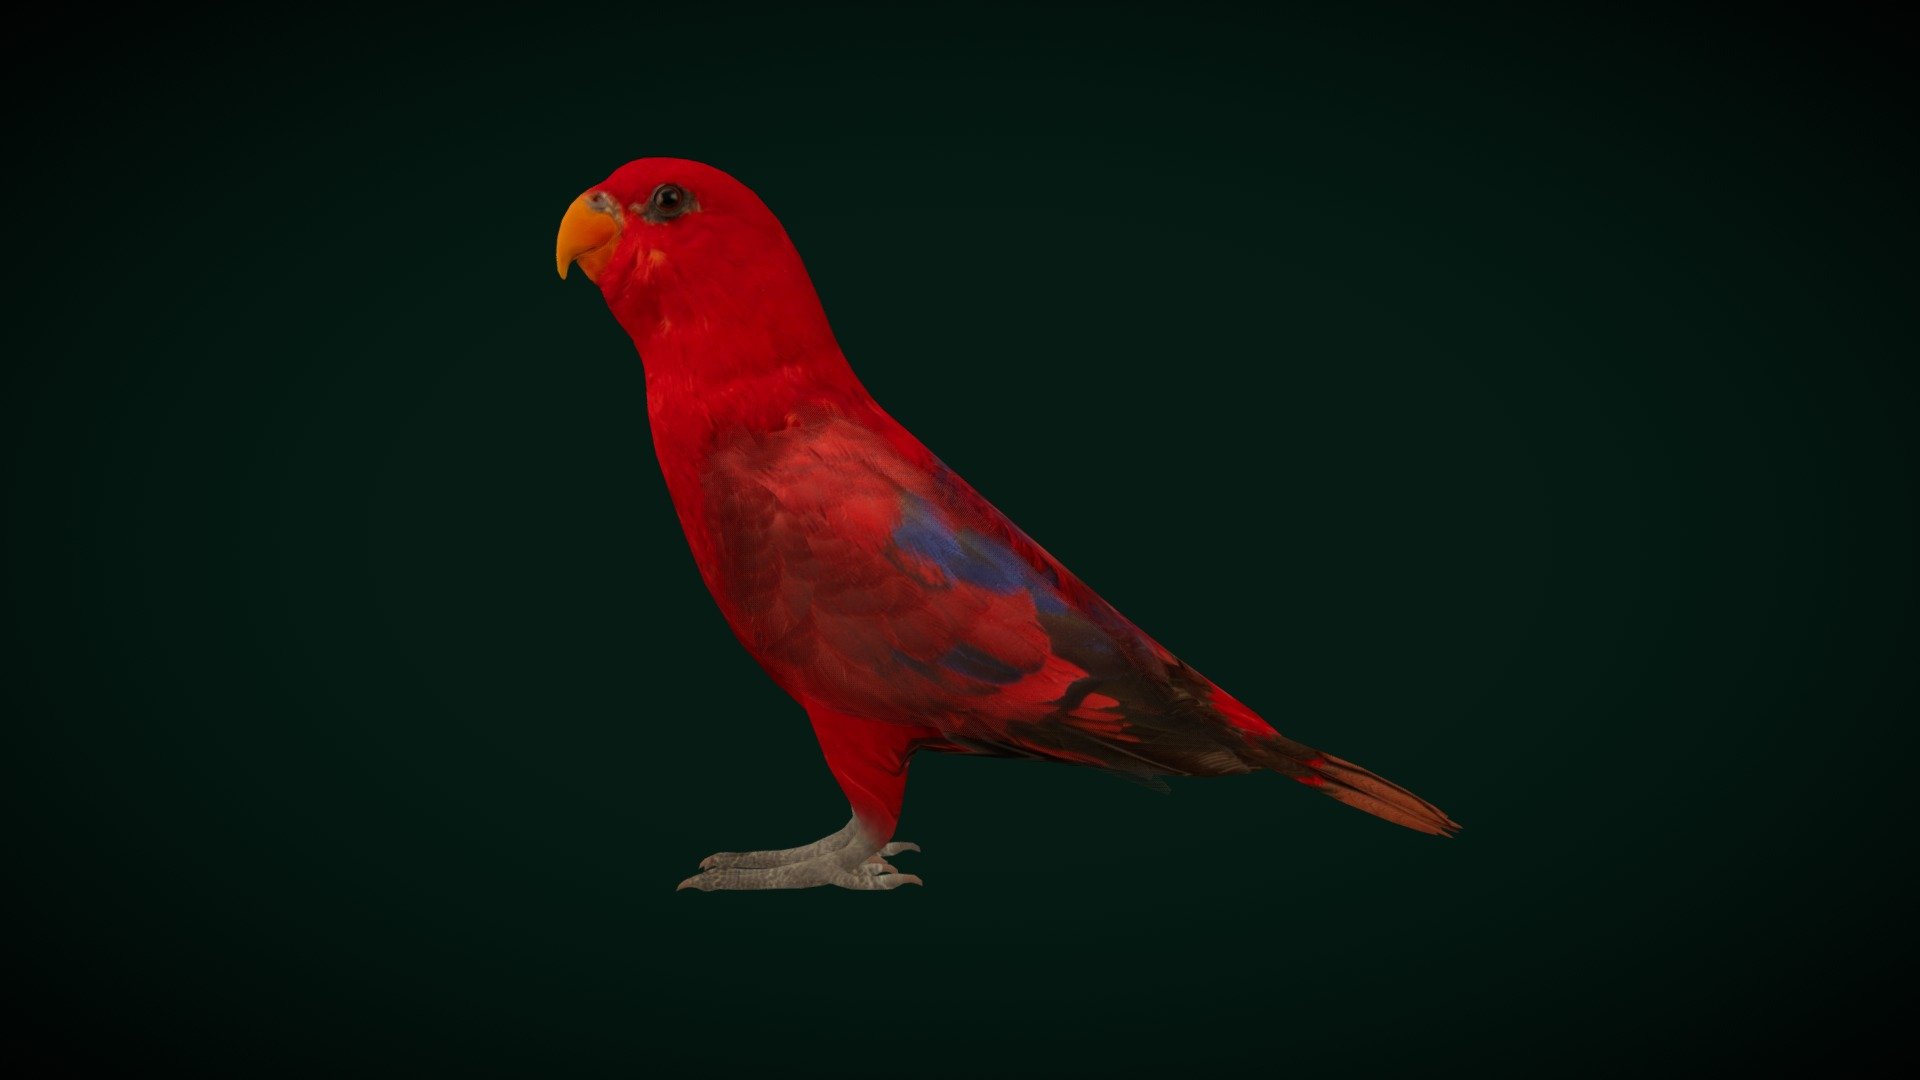 Red Lory Parrot ( Parrot_Birds)Flamboyant ,Theatrical and Pungnacious Birds

Eos_bornea Animal Birds    (Cute,Pet) 

1 Draw Calls

Low-Mid Poly

GameReady 

8 Animations

4K PBR Textures Material 

Unreal FBX (Unreal 4,5 Plus)

Unity FBX  

Blend File 

USDZ File (AR Ready). Real Scale Dimension

Textures Files

GLB File (Unreal 5.1  Plus Native Support)

Gltf File ( Spark AR, Lens Studio(SnapChat) , Effector(Tiktok) , Spline, Play Canvas ) Compatible

Triangles : 14583

Vertices  : 8929

Faces     : 10652

Edges     : 19569

Diffuse, Metallic, Roughness , Normal Map ,Specular Map,AO,
 
The red lory is a species of parrot in the family Psittaculidae. It is the second-most commonly kept lory in captivity, after the rainbow lorikeet. Wikipedia
Mass: 160 g (Adult) Encyclopedia of Life
Conservation status: Least Concern (Population decreasing) Encyclopedia of Life
Family: Psittaculidae
Species: E. bornea - Red Lory Flamboyant Parrot Bird (Game Ready) - Buy Royalty Free 3D model by Nyilonelycompany 3d model